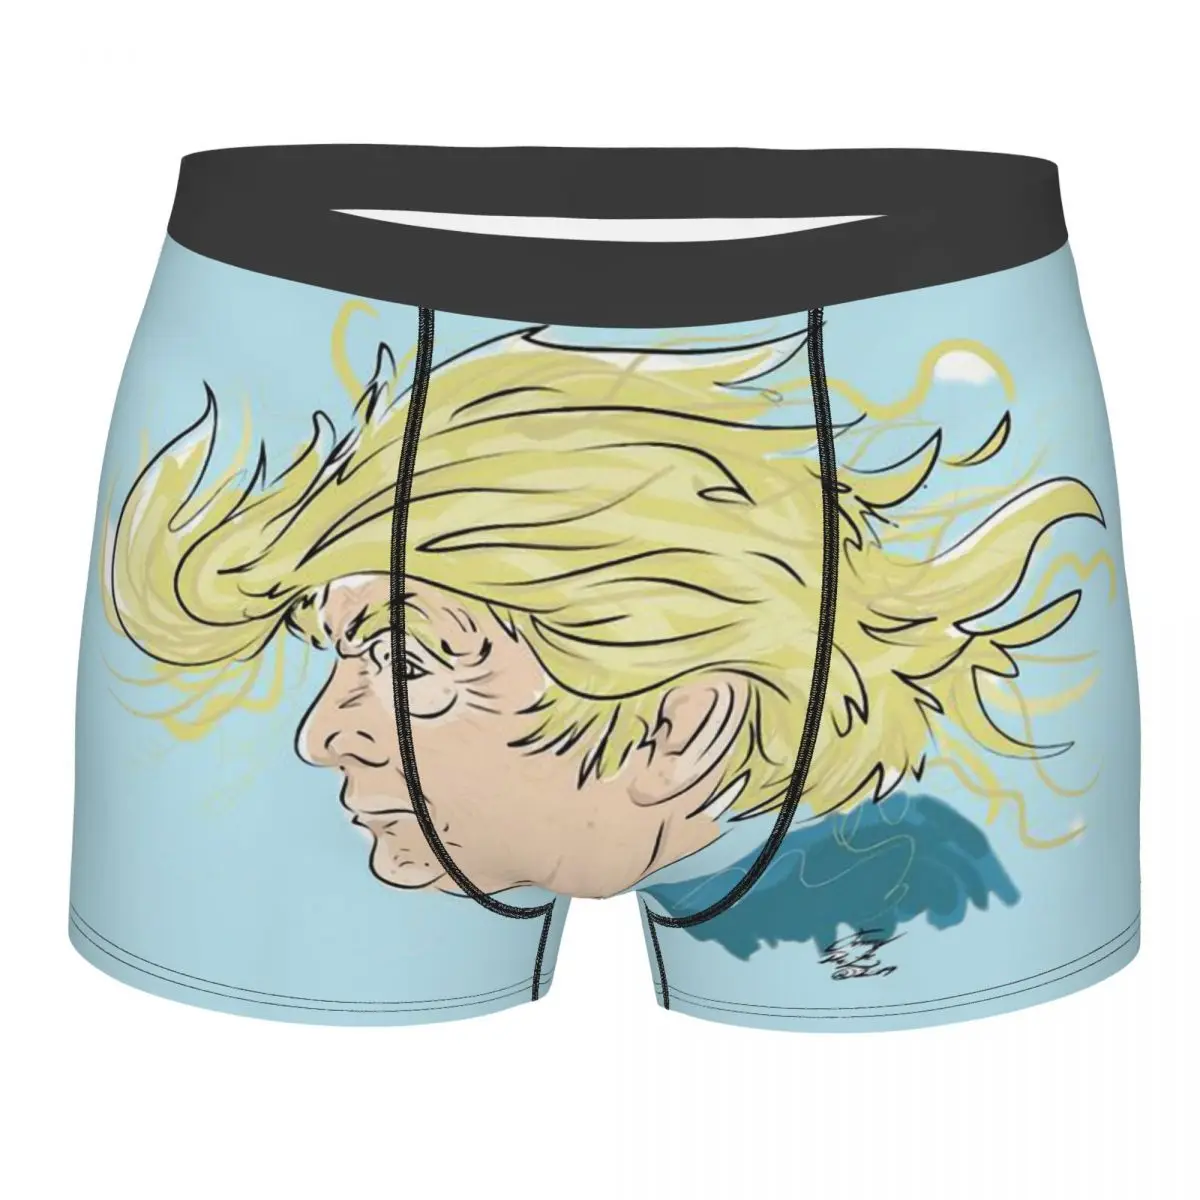 Donald Trump Cartoon Men Underwear, Highly Breathable printing Top Quality Gift Idea impeach the case against donald trump